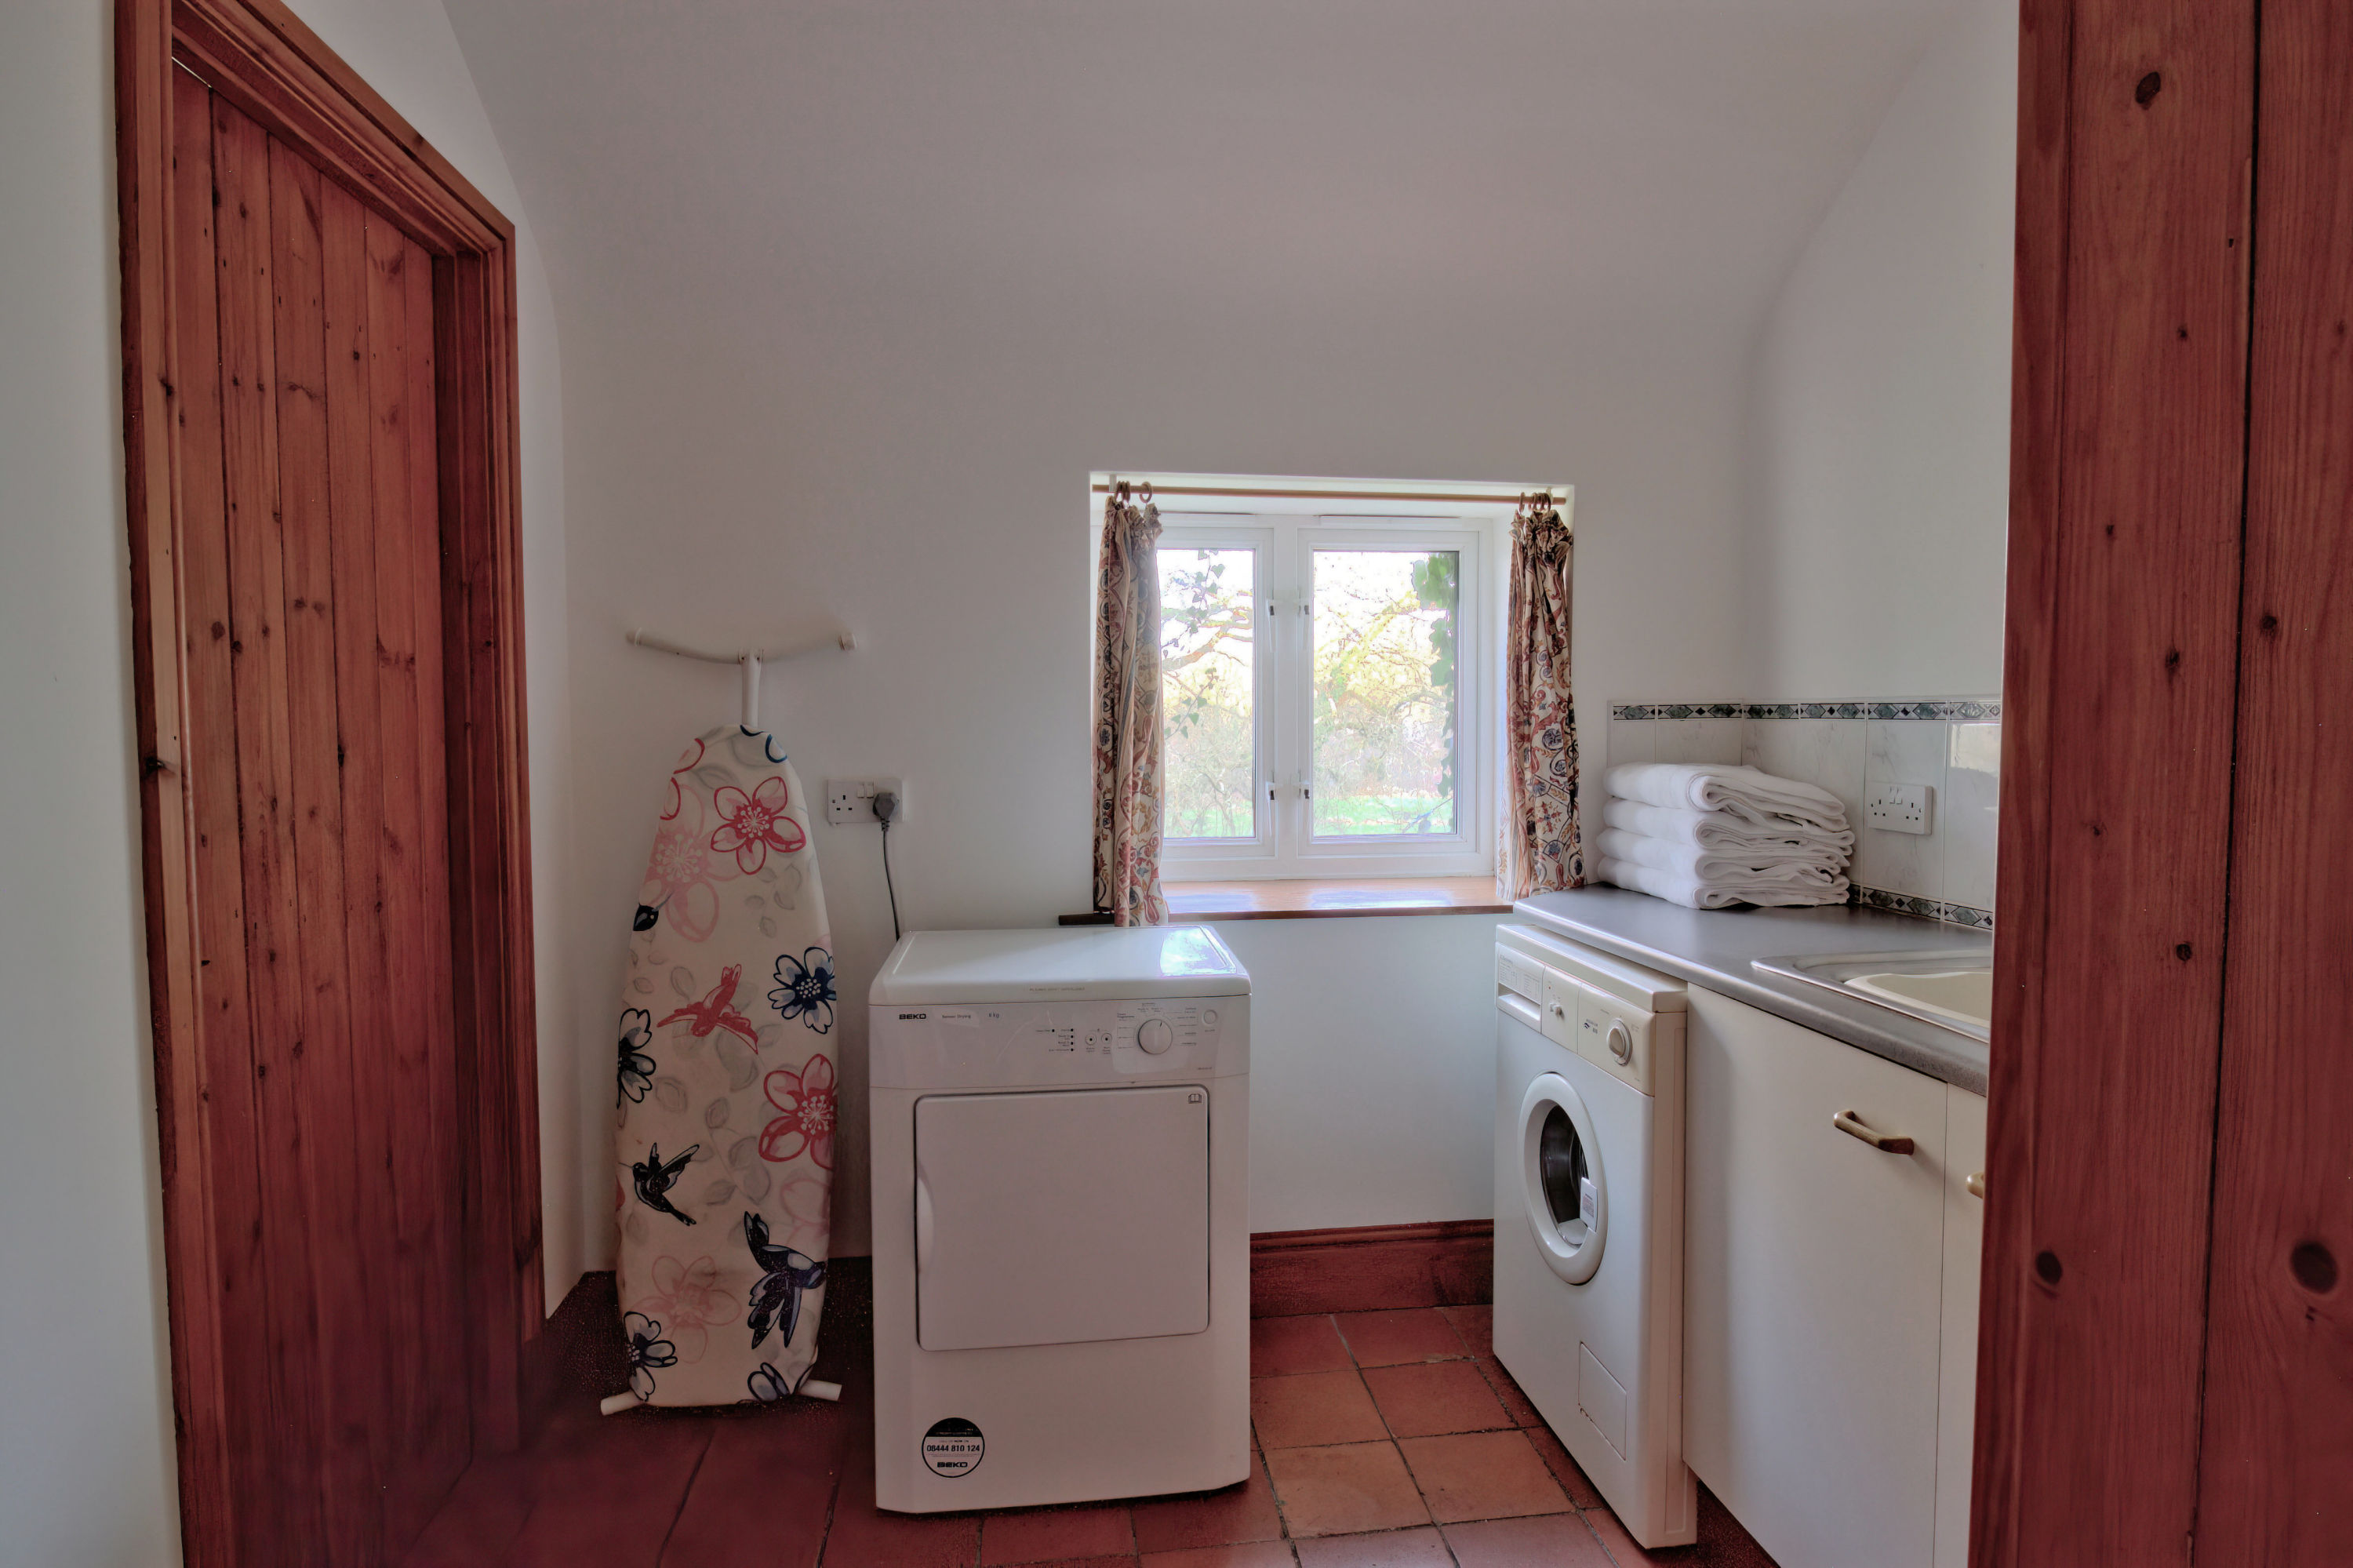 utility room and appliances